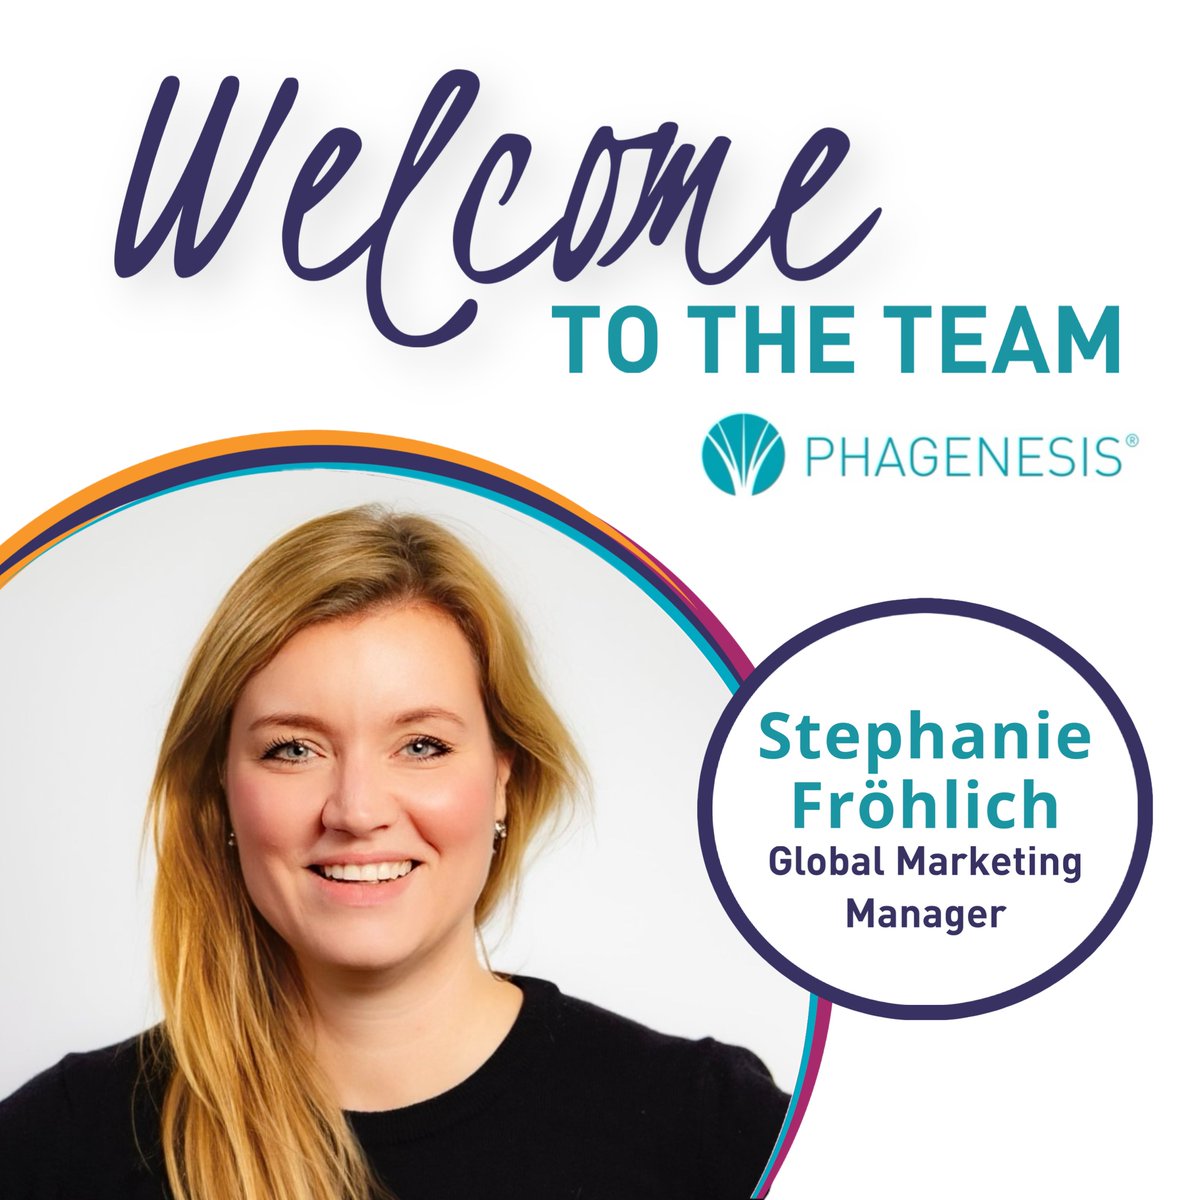 🌟Welcome Stephanie Frohlich, our new Global Marketing Manager from Germany, to #Phagenesis. Witg over 13 years of experience in medical device sales and marketing, Stephanie is set to enrich our team with her expertise and insights. #MarketingInHealthcare #GlobalHealthImpact